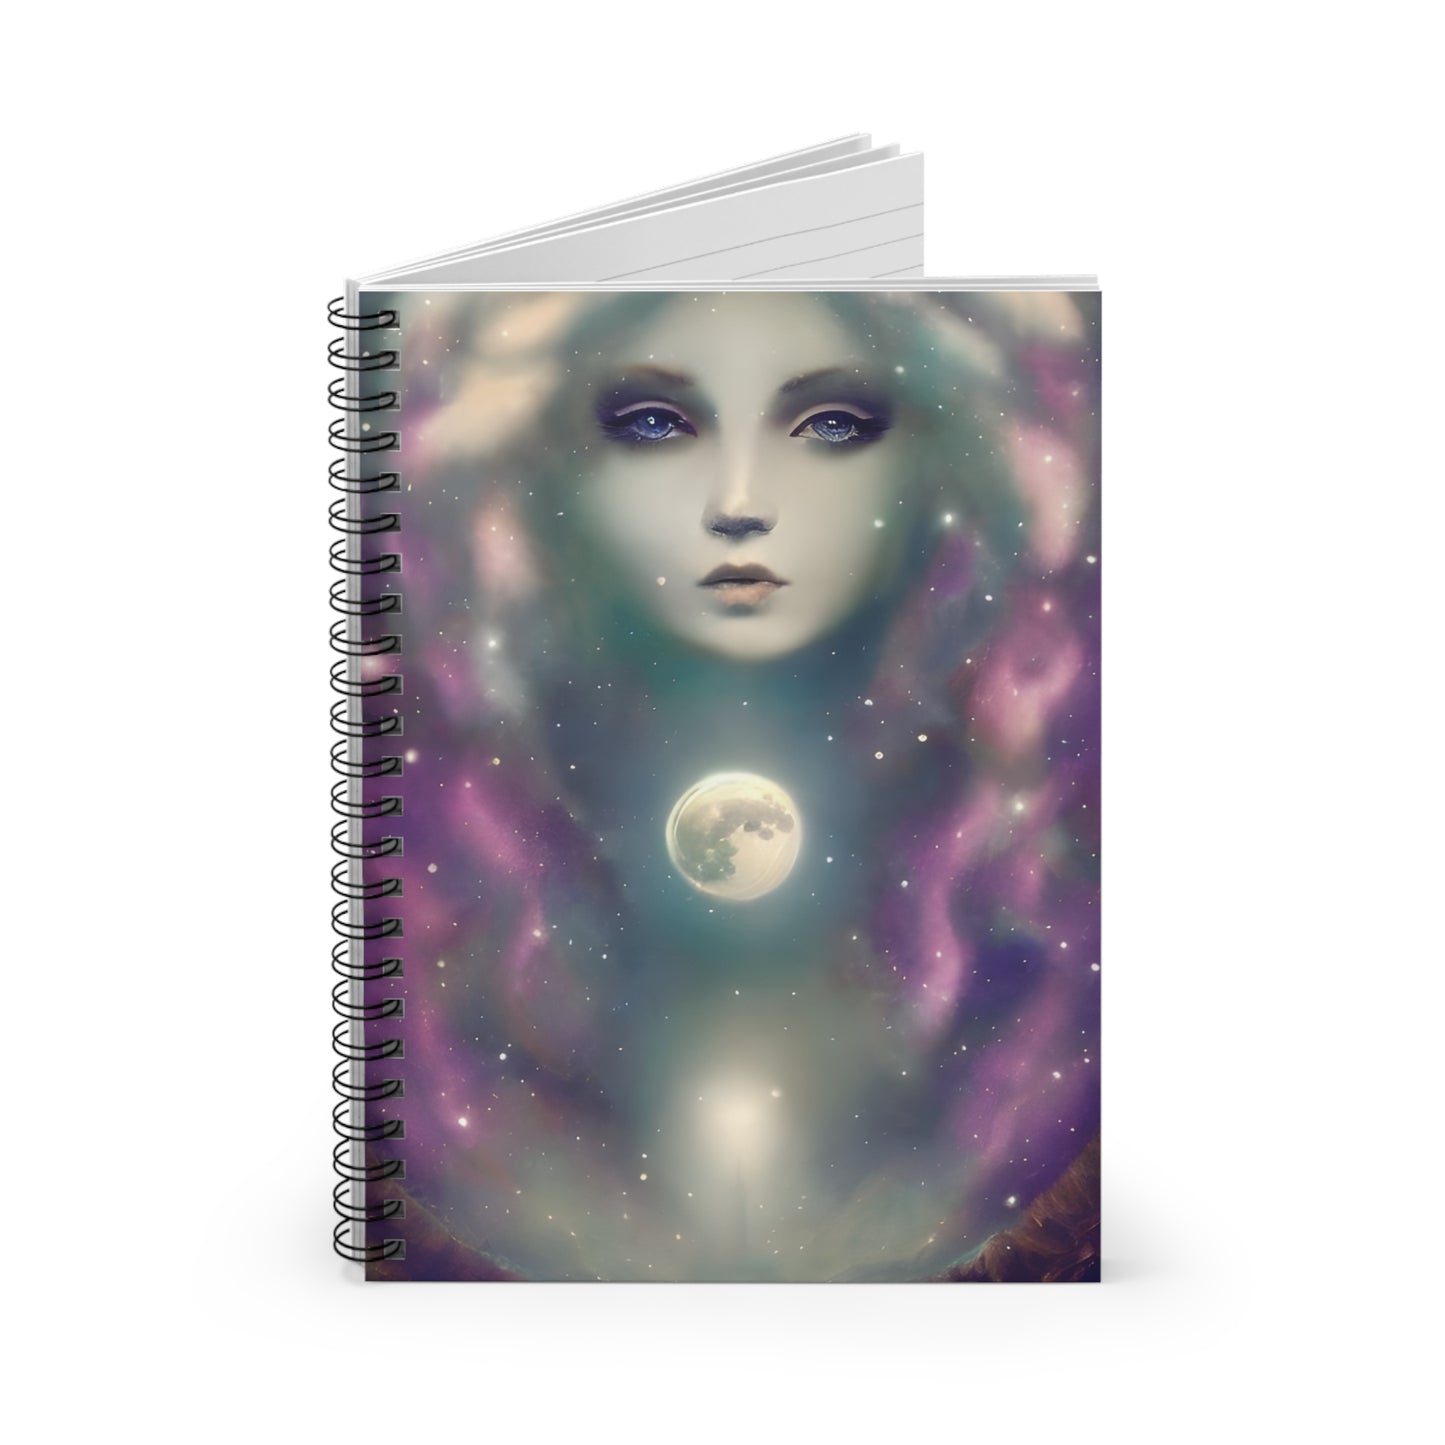 Majestic Moon Goddess Spiral Notebook - Ruled Line, 118 Ruled Line Pages